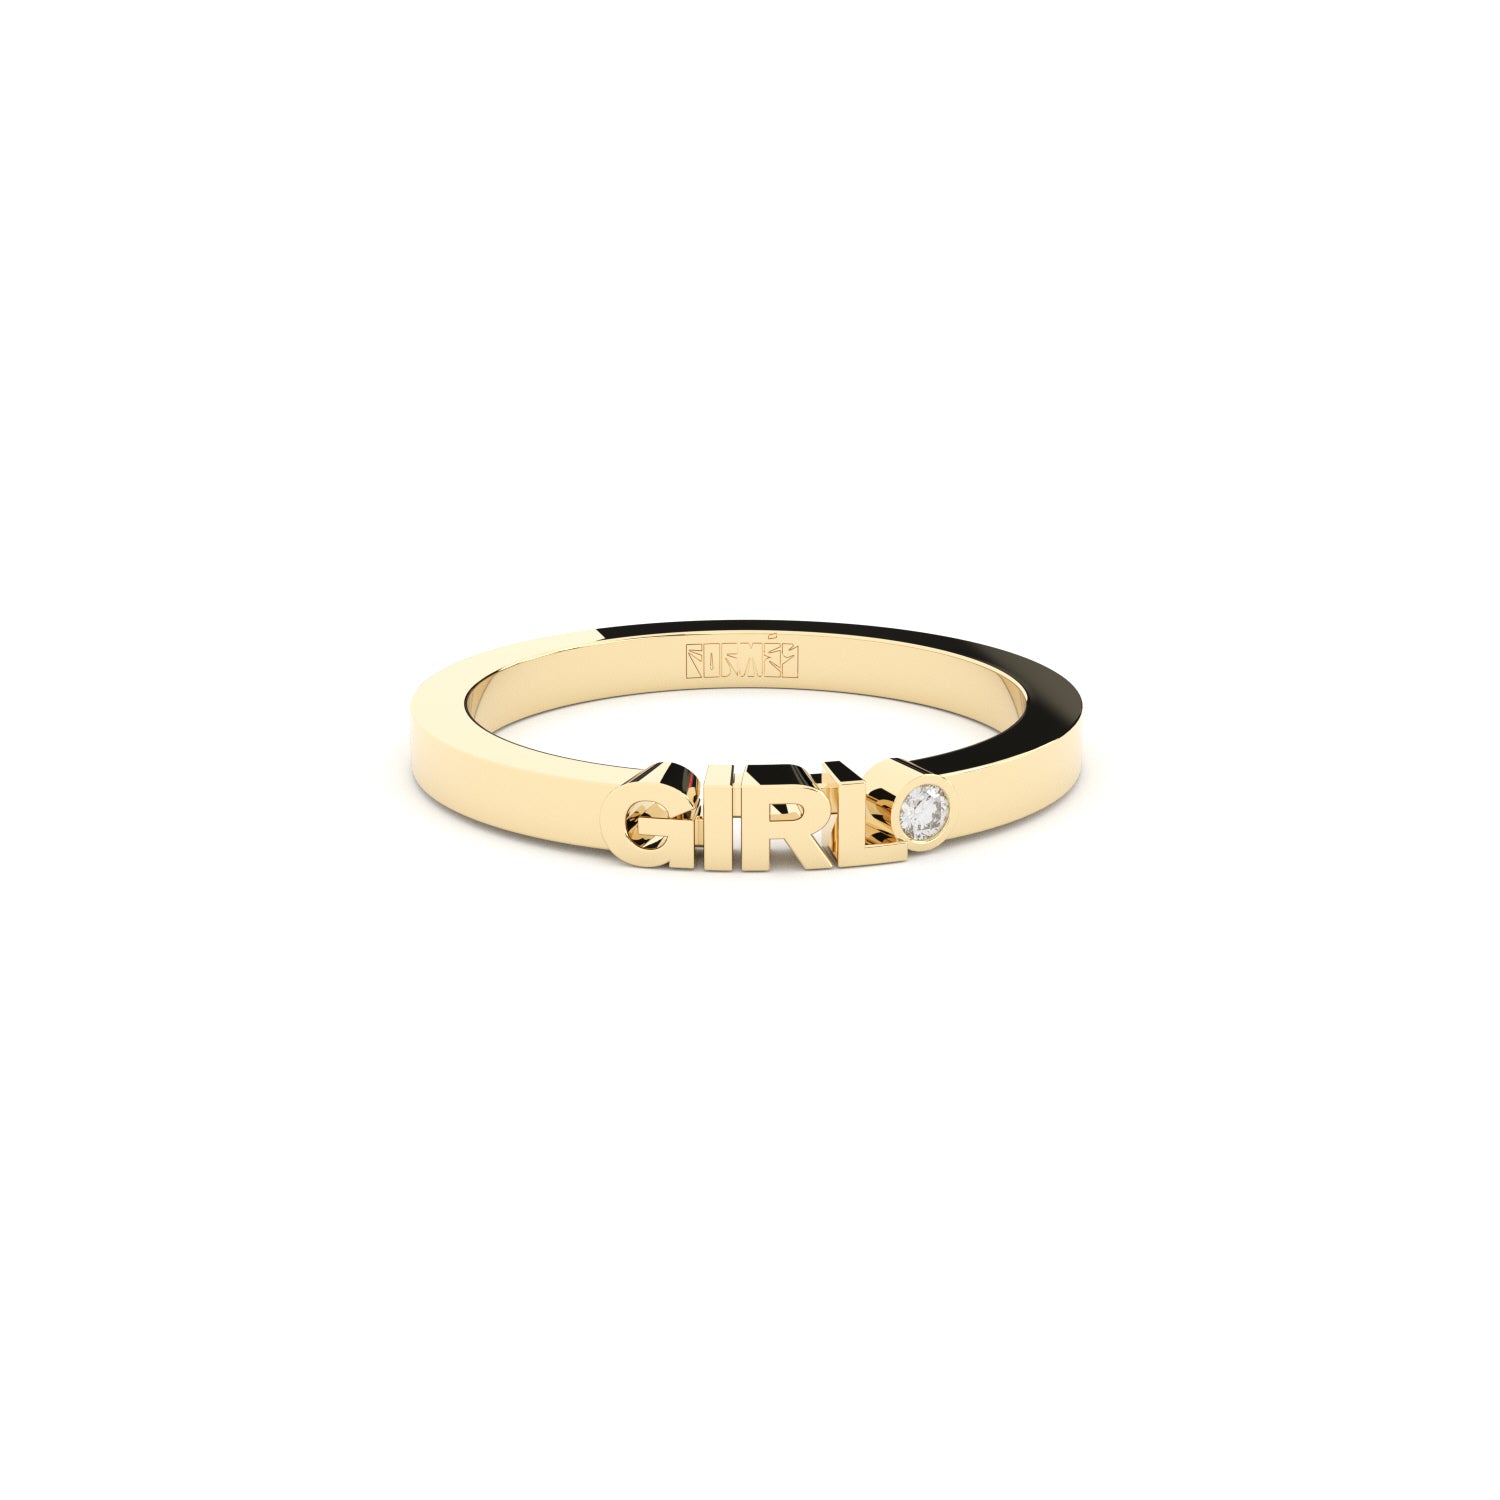 Plant 24k gold rings – BH jewelry